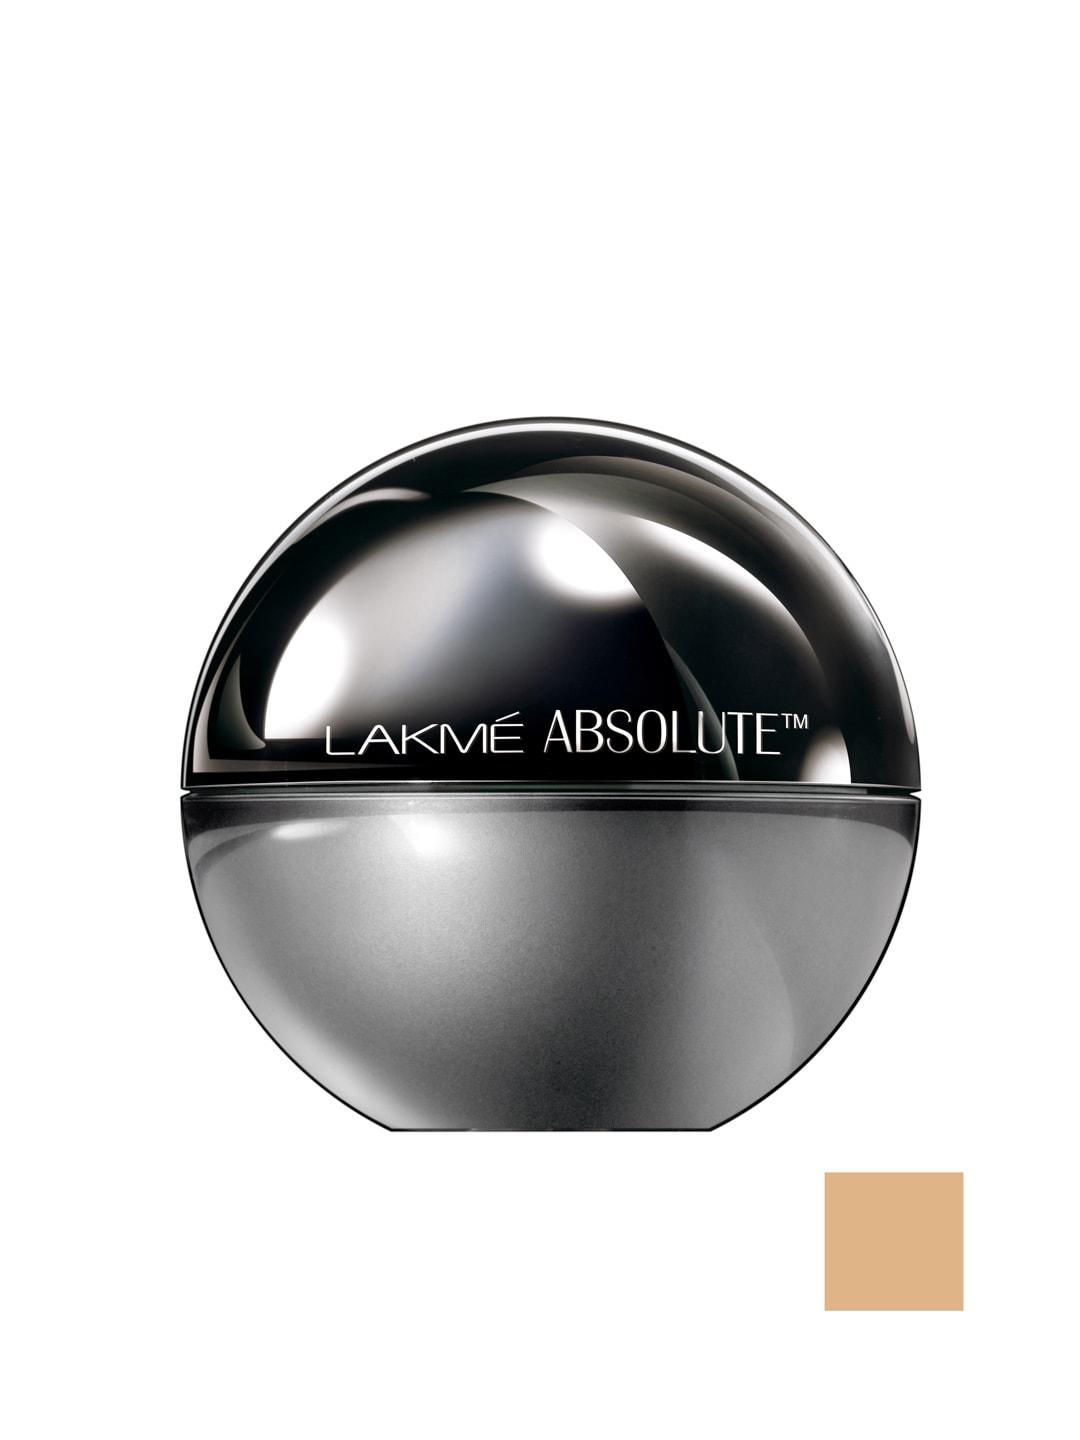 Lakme Absolute Mattreal Skin Natural Mousse with SPF 8 - Ivory Fair